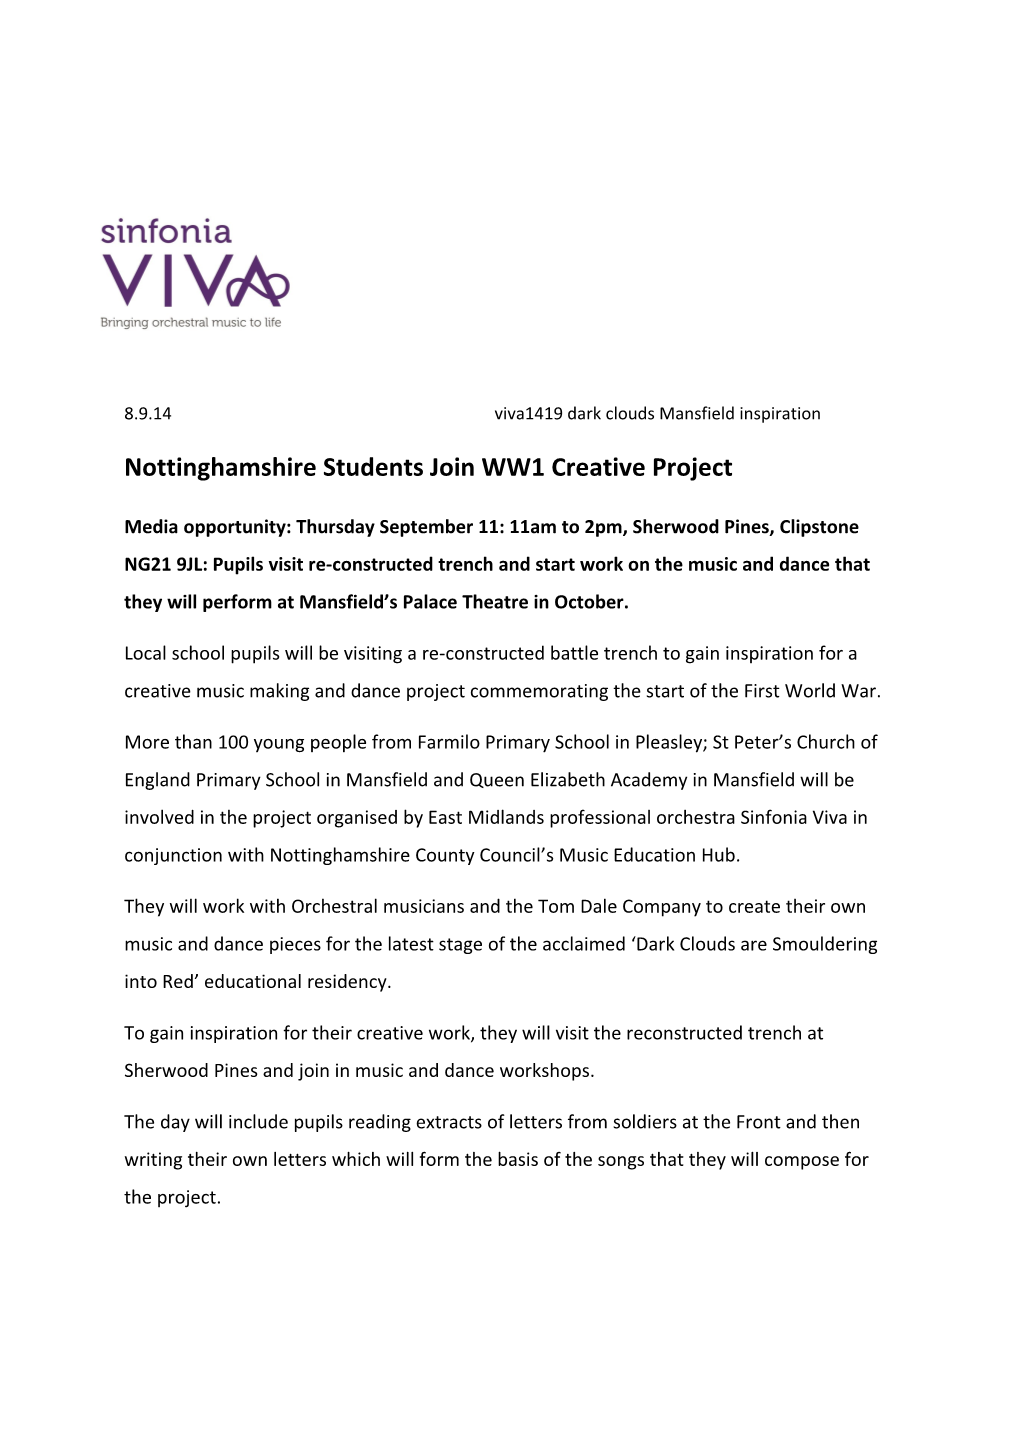 Nottinghamshire Students Join WW1 Creative Project